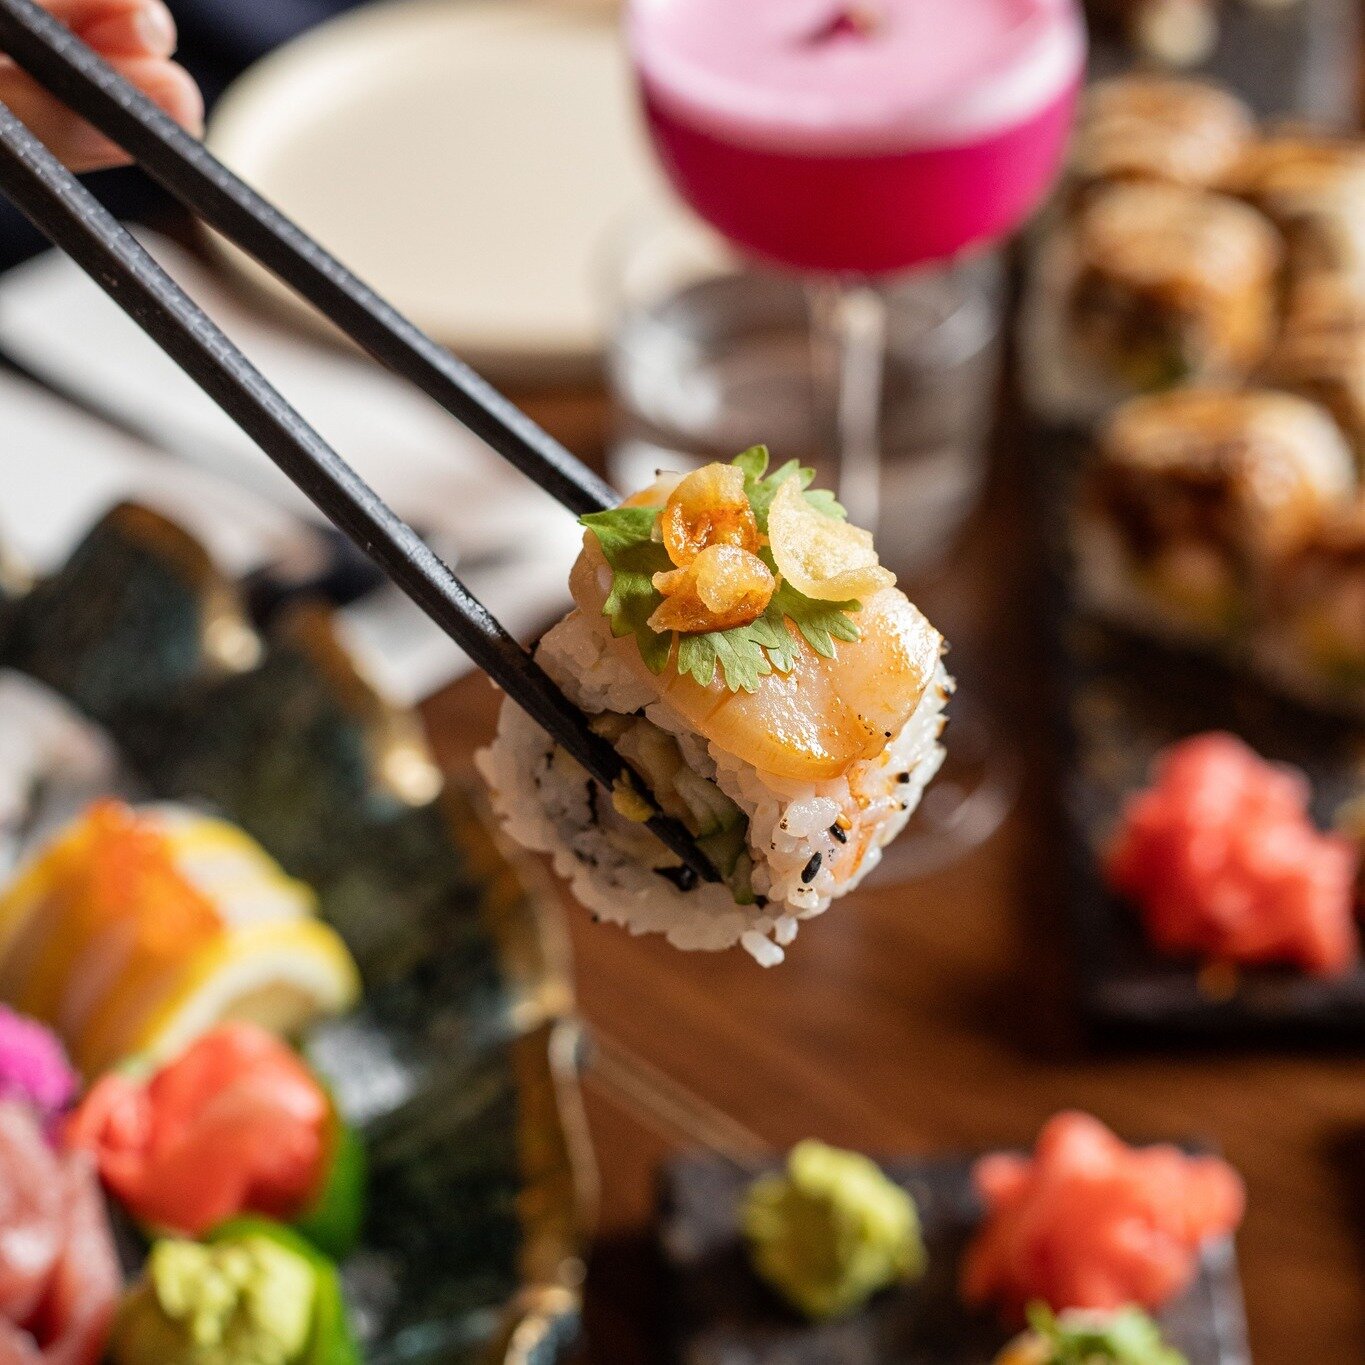 Get ready to elevate your sushi game with our Ebi &amp; Scallop Maki! 

Featuring crunchy prawn tempura, delicate scallop, and a spicy twist of gochujang, every bite is a taste sensation you won't soon forget.

#ChopChop #Canberra #Restaurant